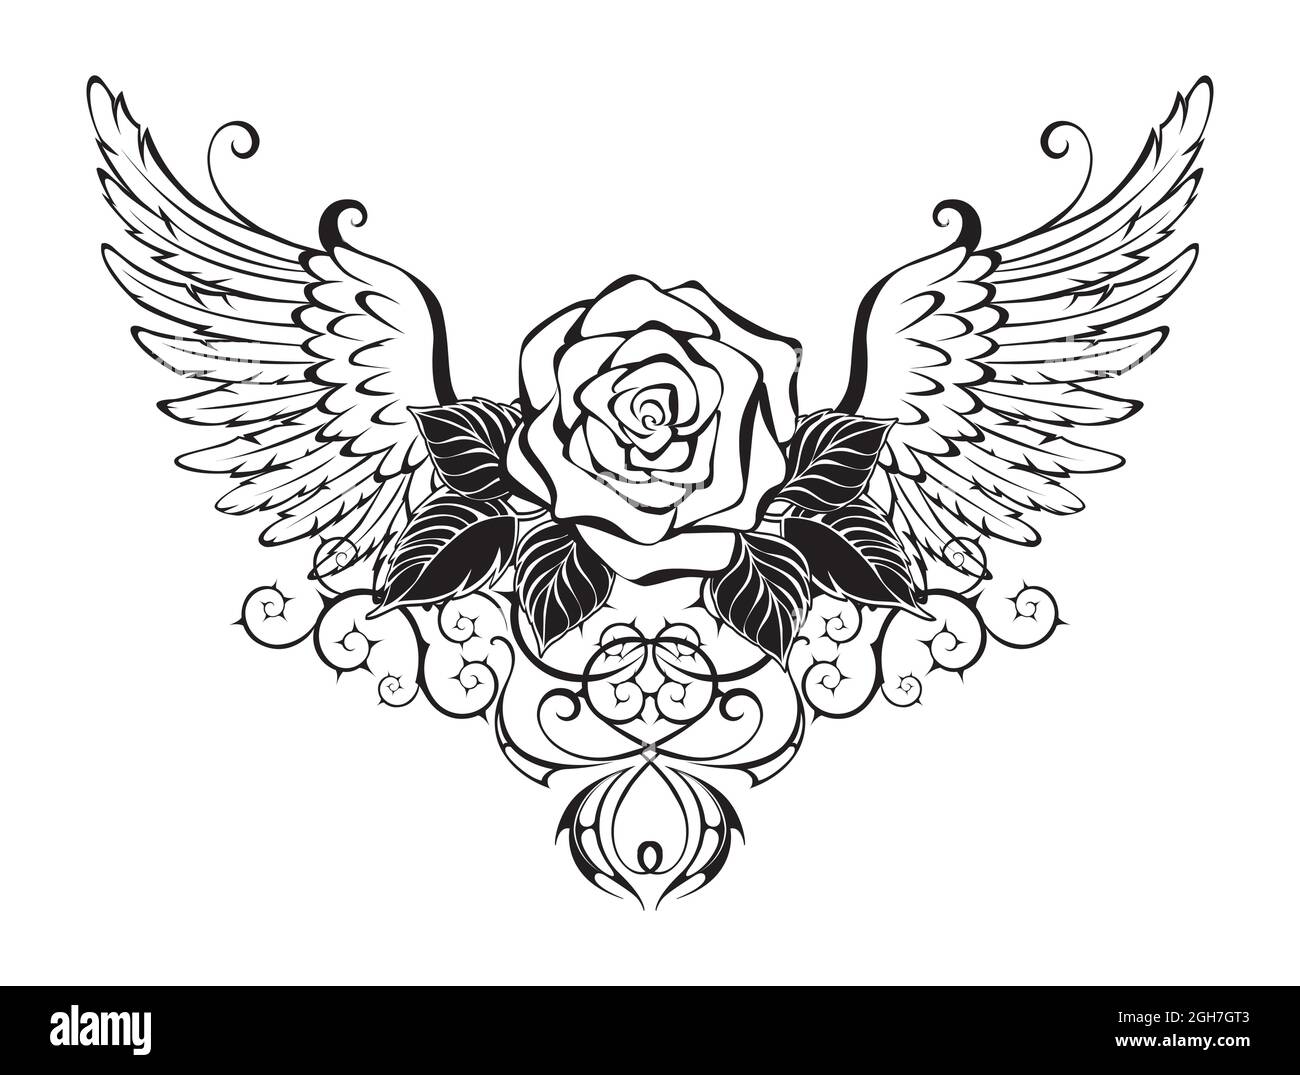 Artistically drawn, blooming, outline rose, decorated with black leaves with contour angel wings on white background. Stock Vector